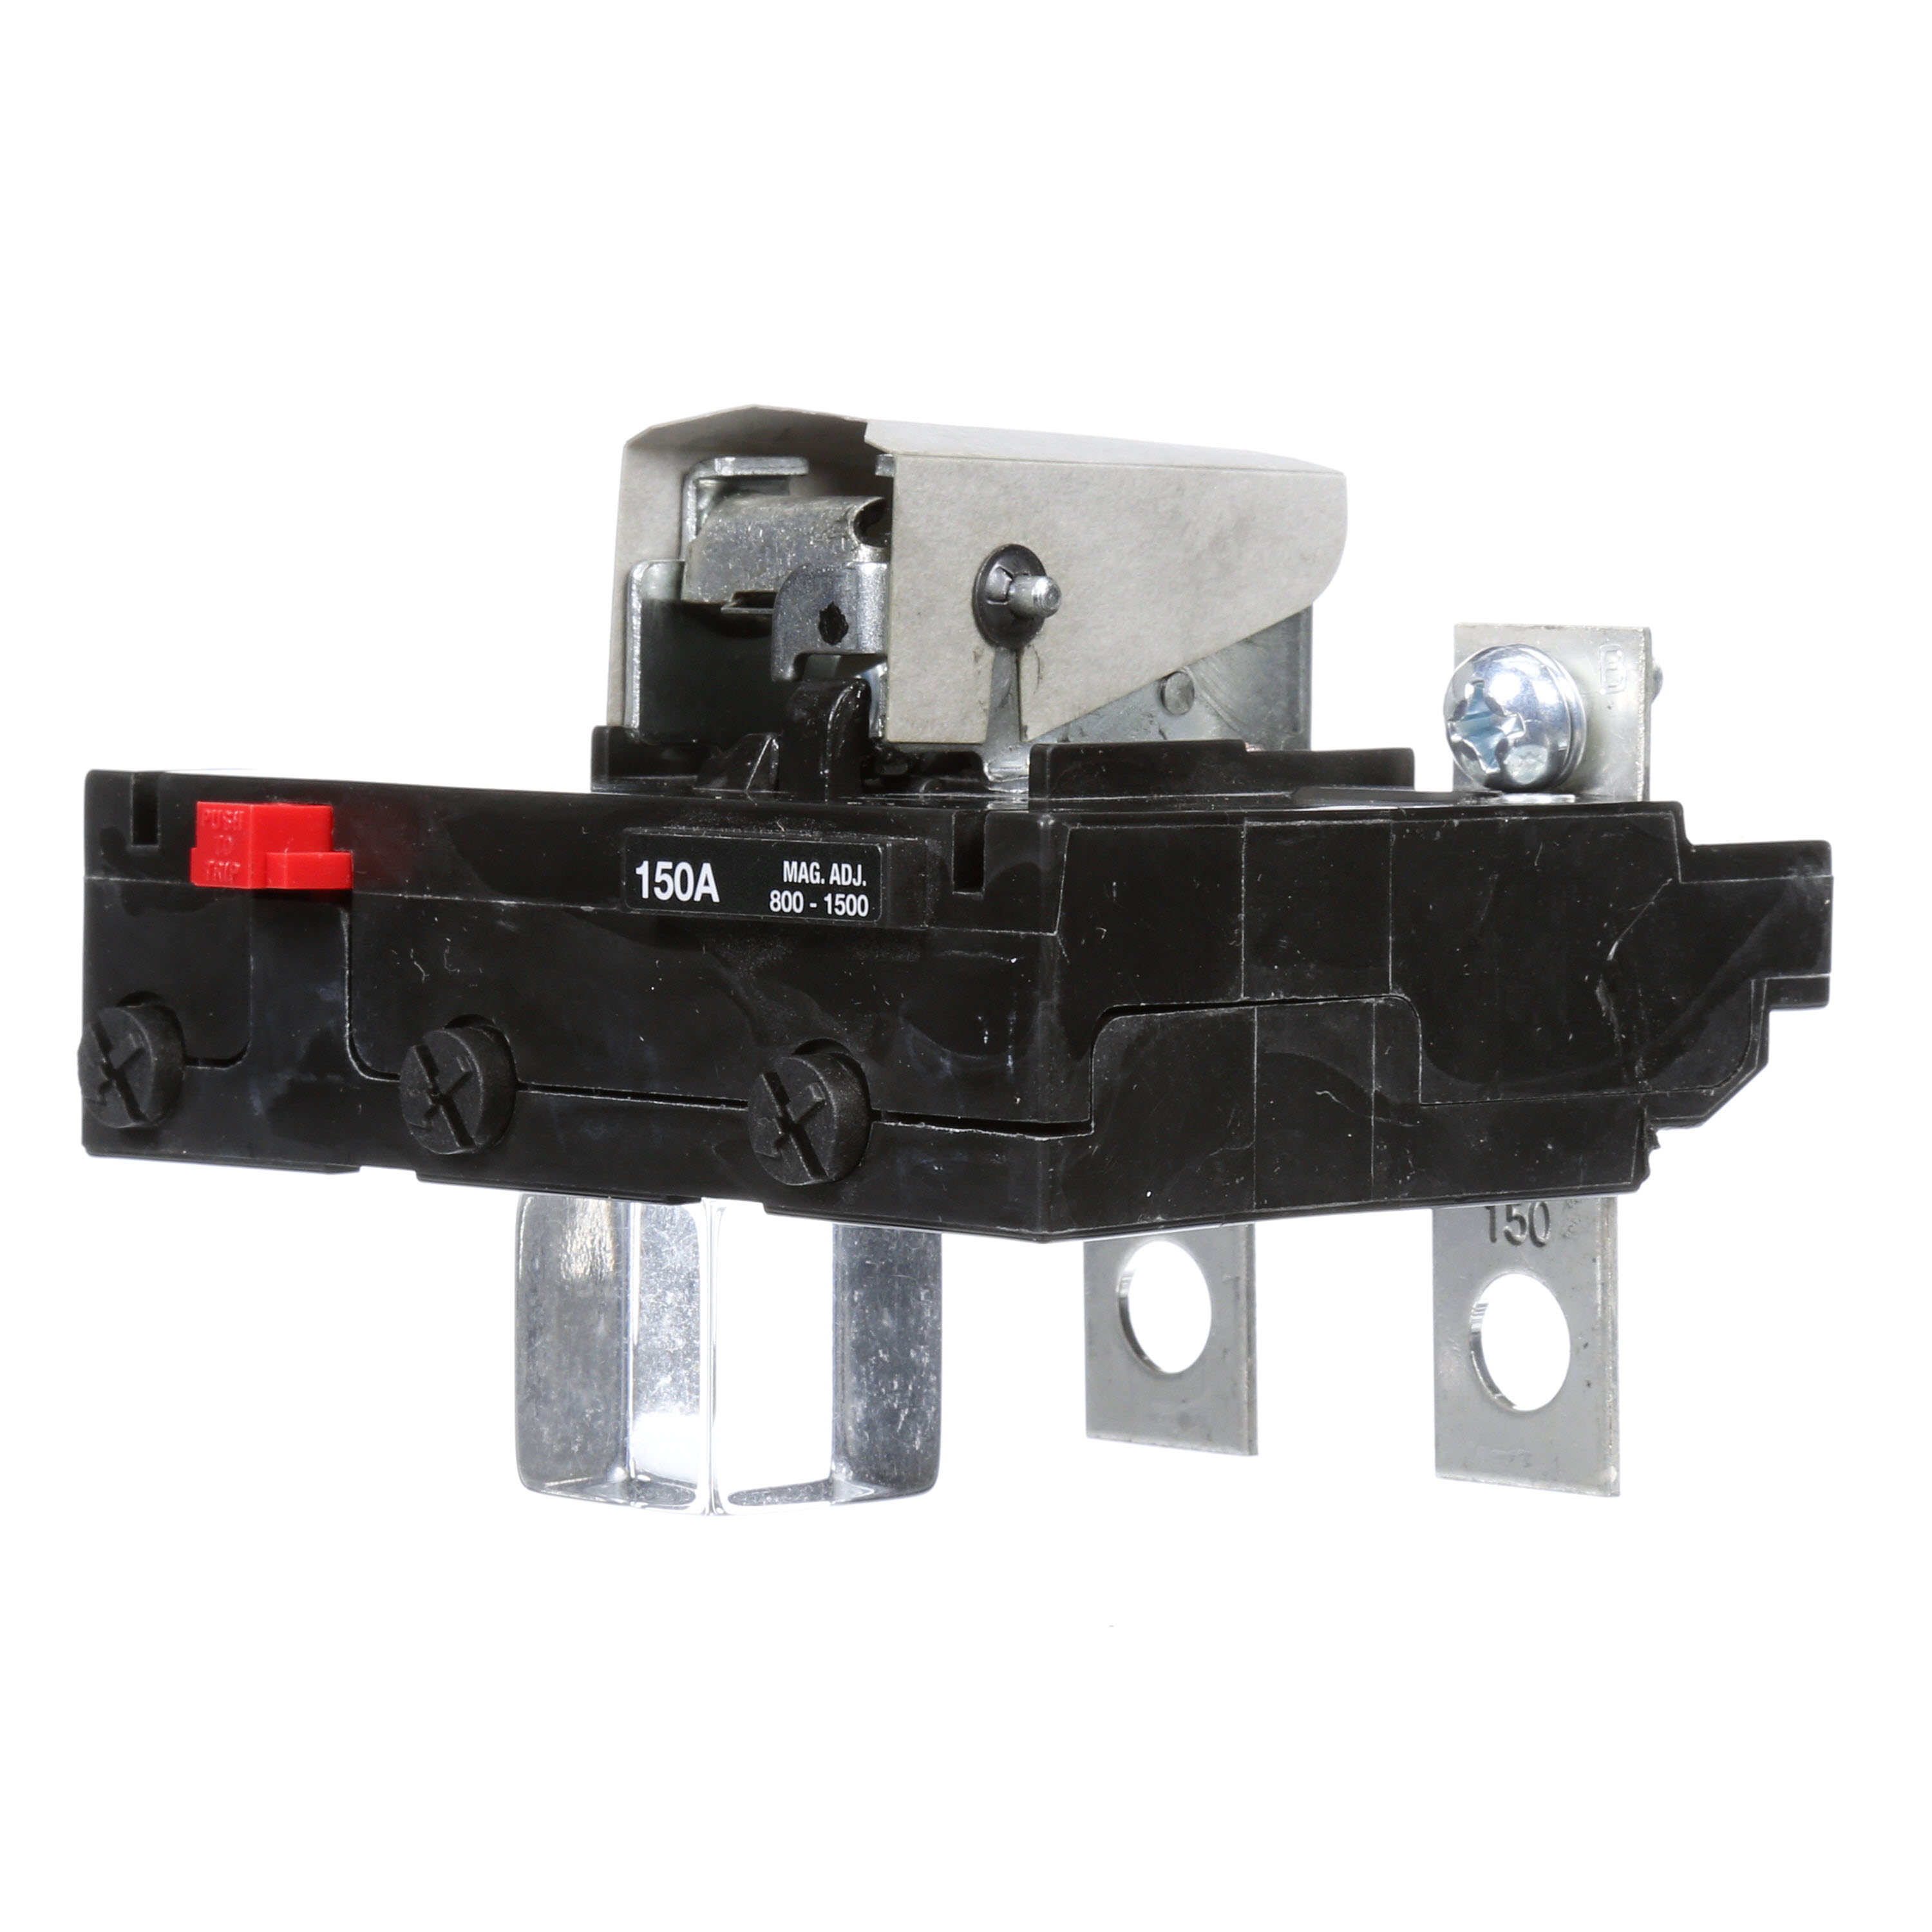 SIEMENS LOW VOLTAGE SENTRON MOLDED CASE CIRCUIT BREAKER. THERMAL - MAGNETIC TRIP UNIT FOR FD FRAME 150A 3-POLE 600V BREAKERS.